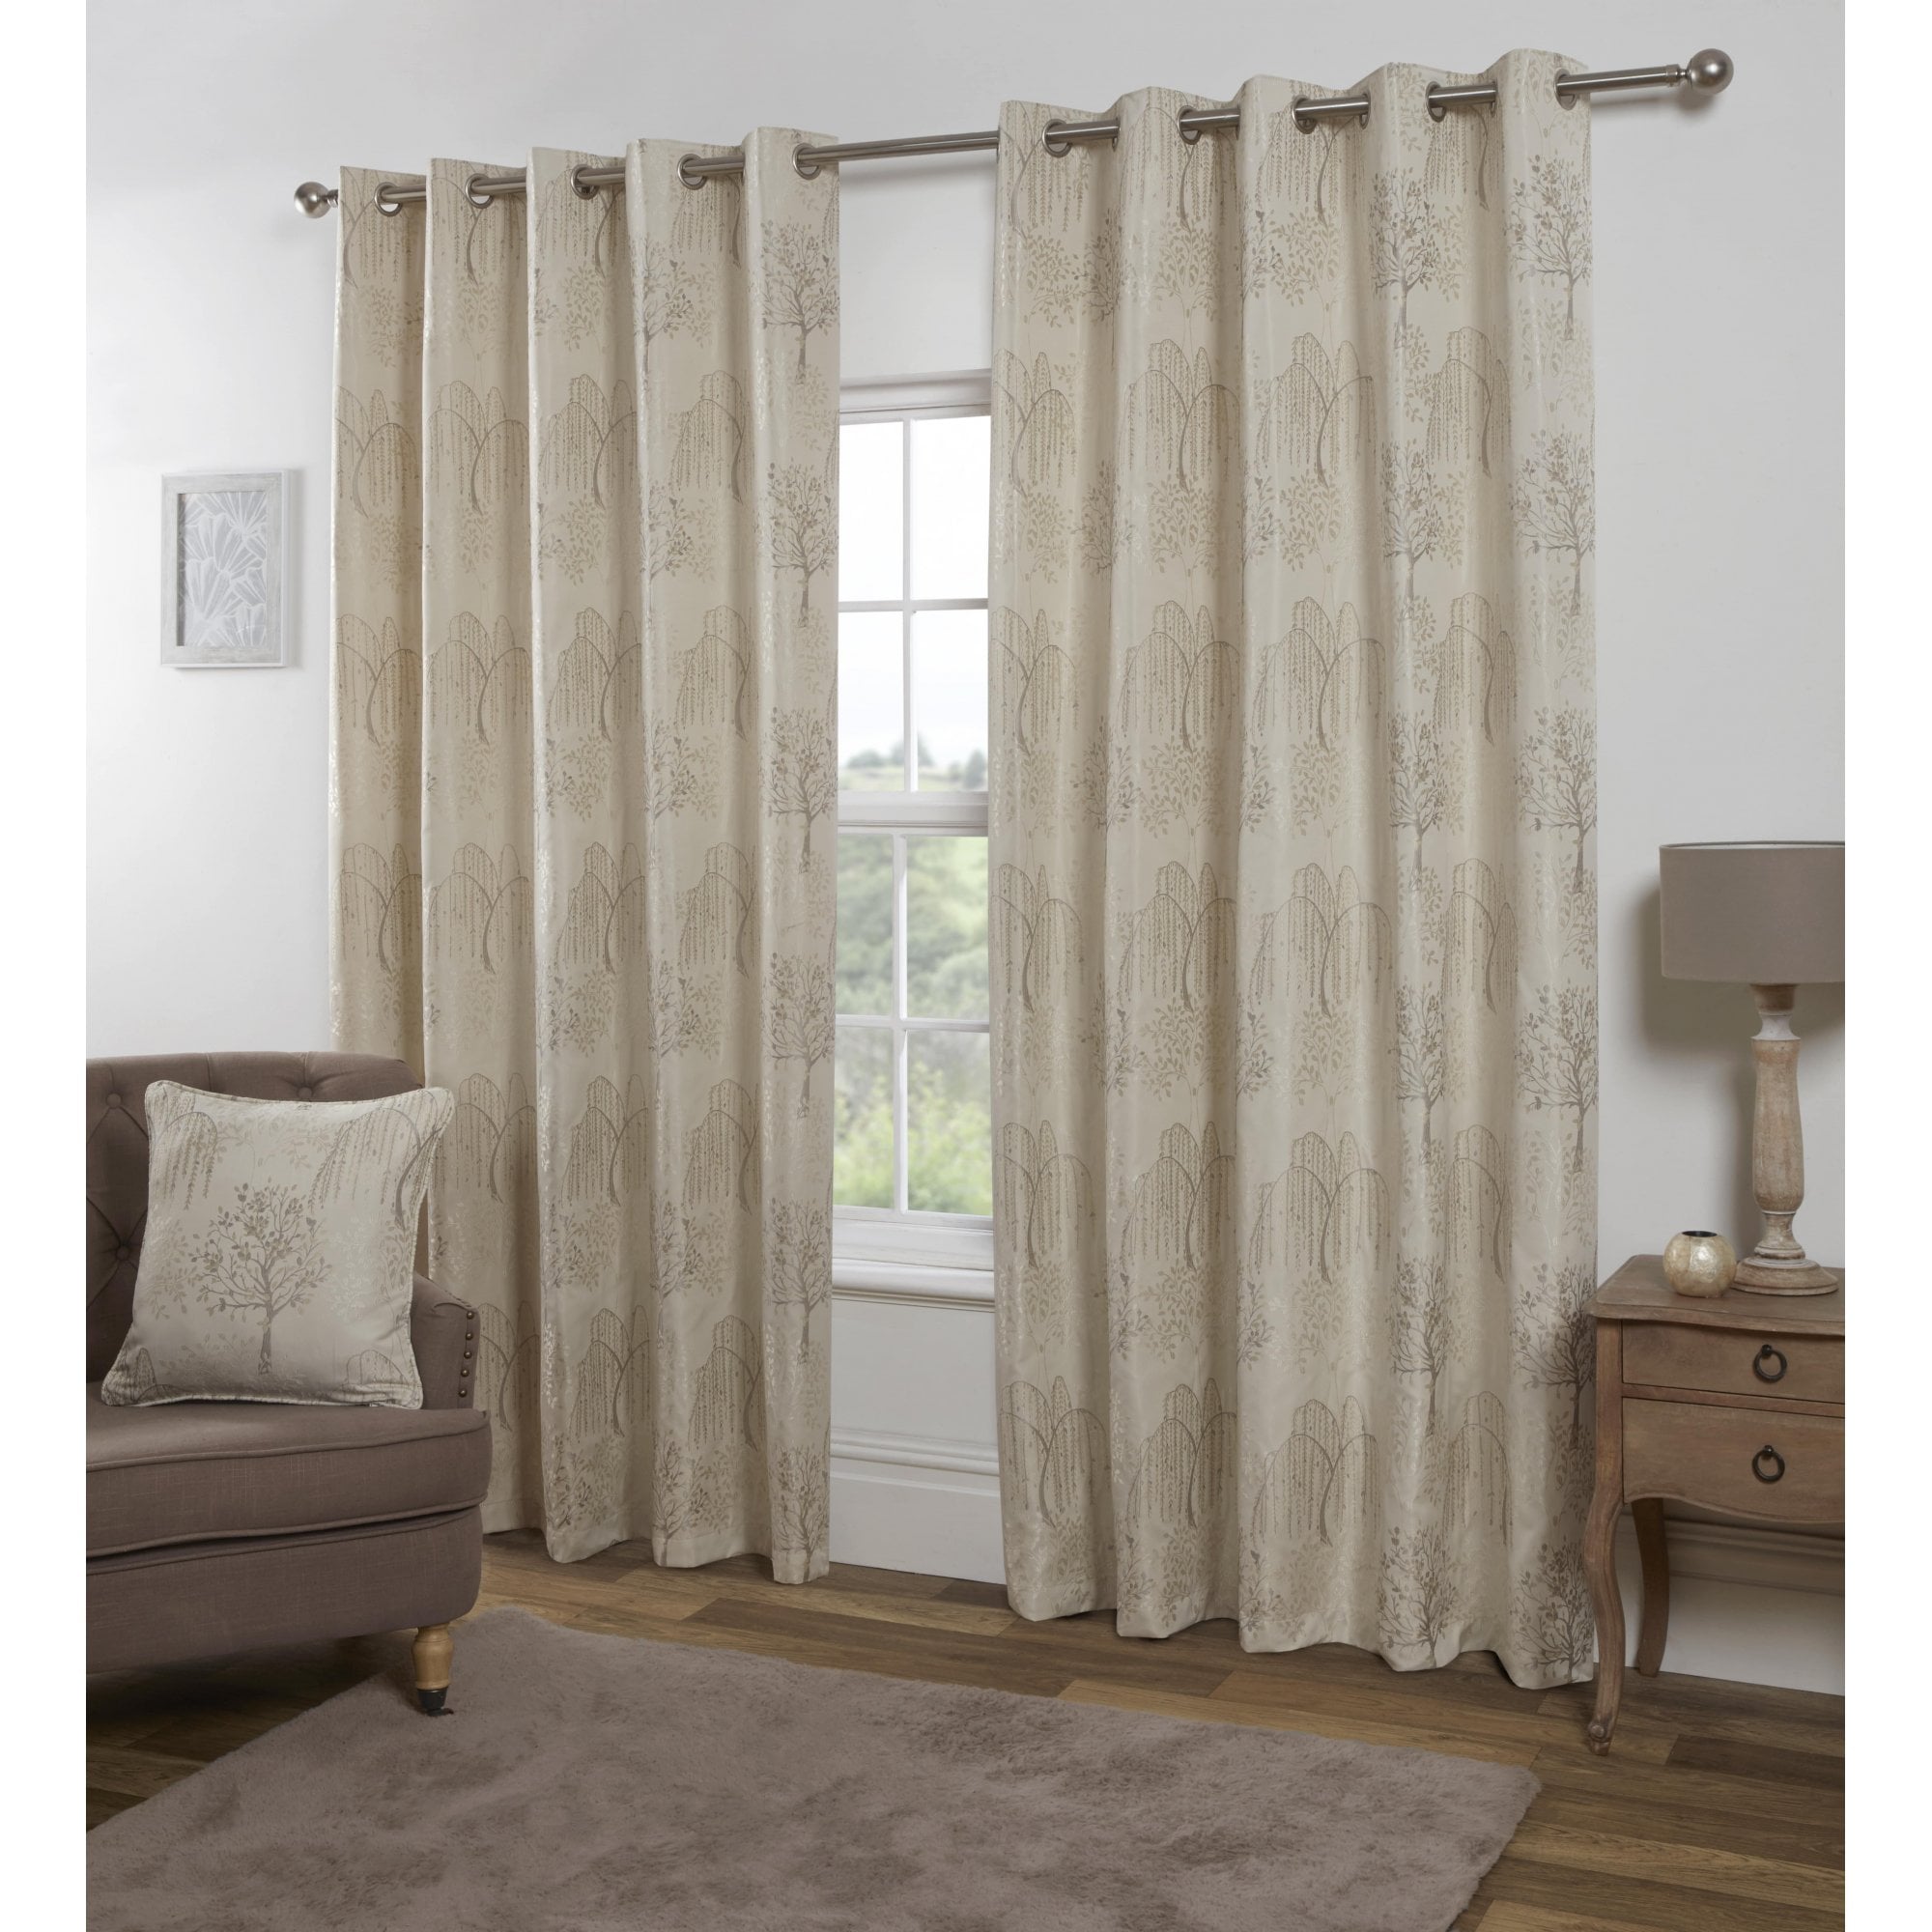 Lewis’s Orchard Patterned Eyelet Curtains - Ivory - 117cm (46") X 137cm (54")  | TJ Hughes